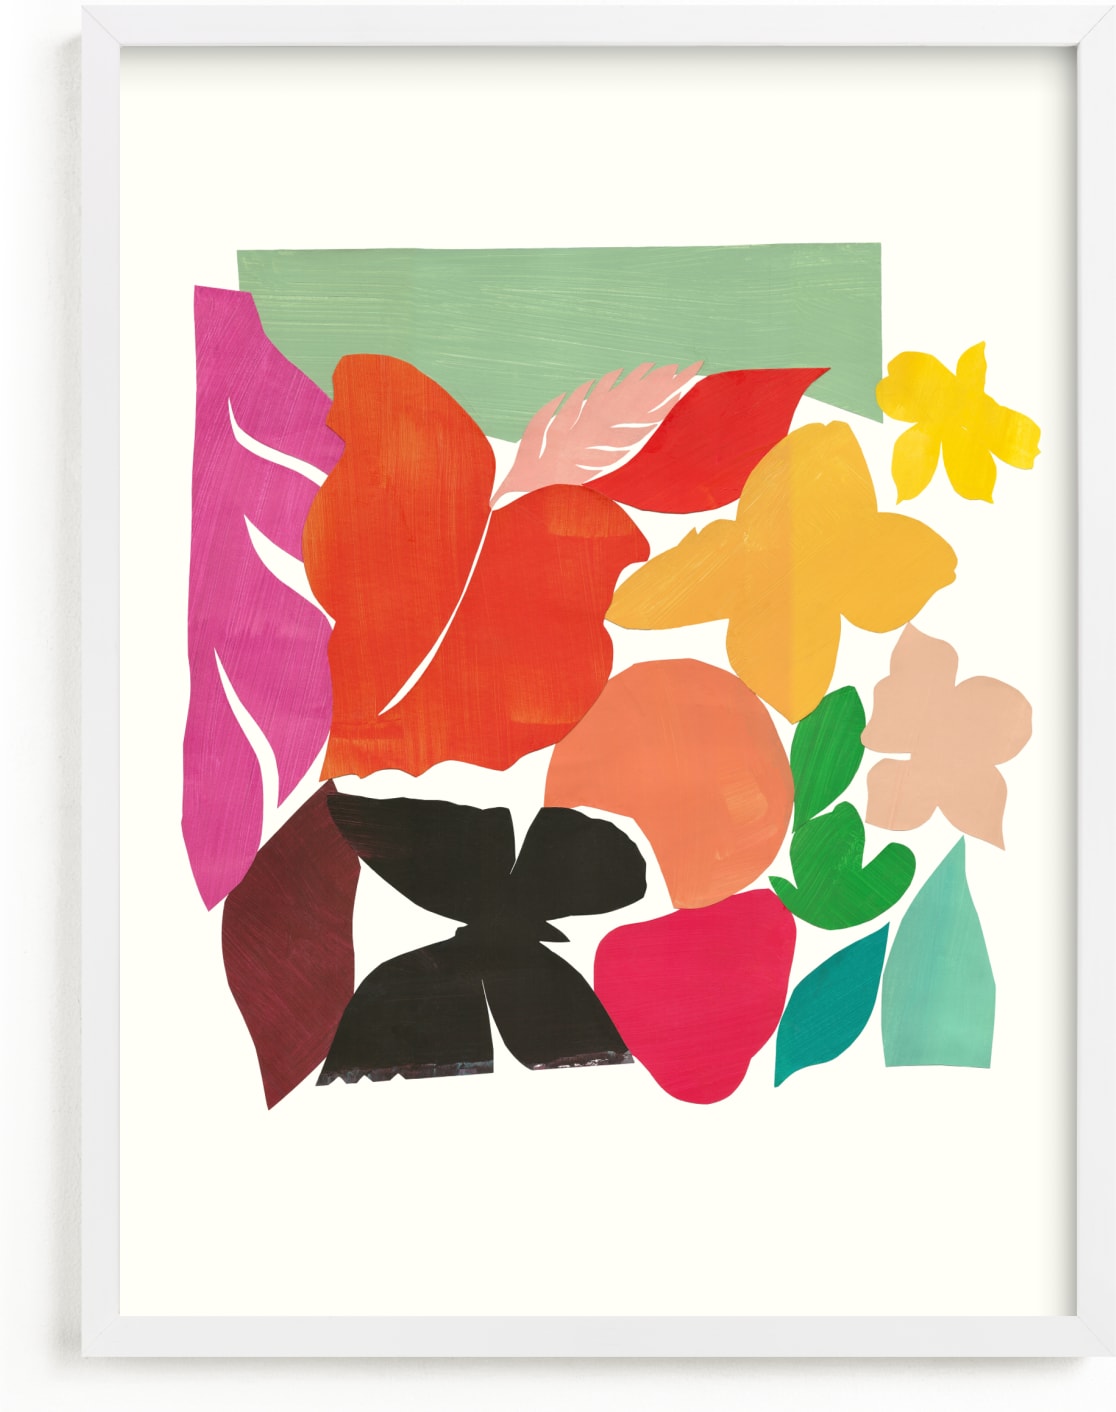 This is a colorful kids wall art by Lise Gulassa called Mariposa Jungle.